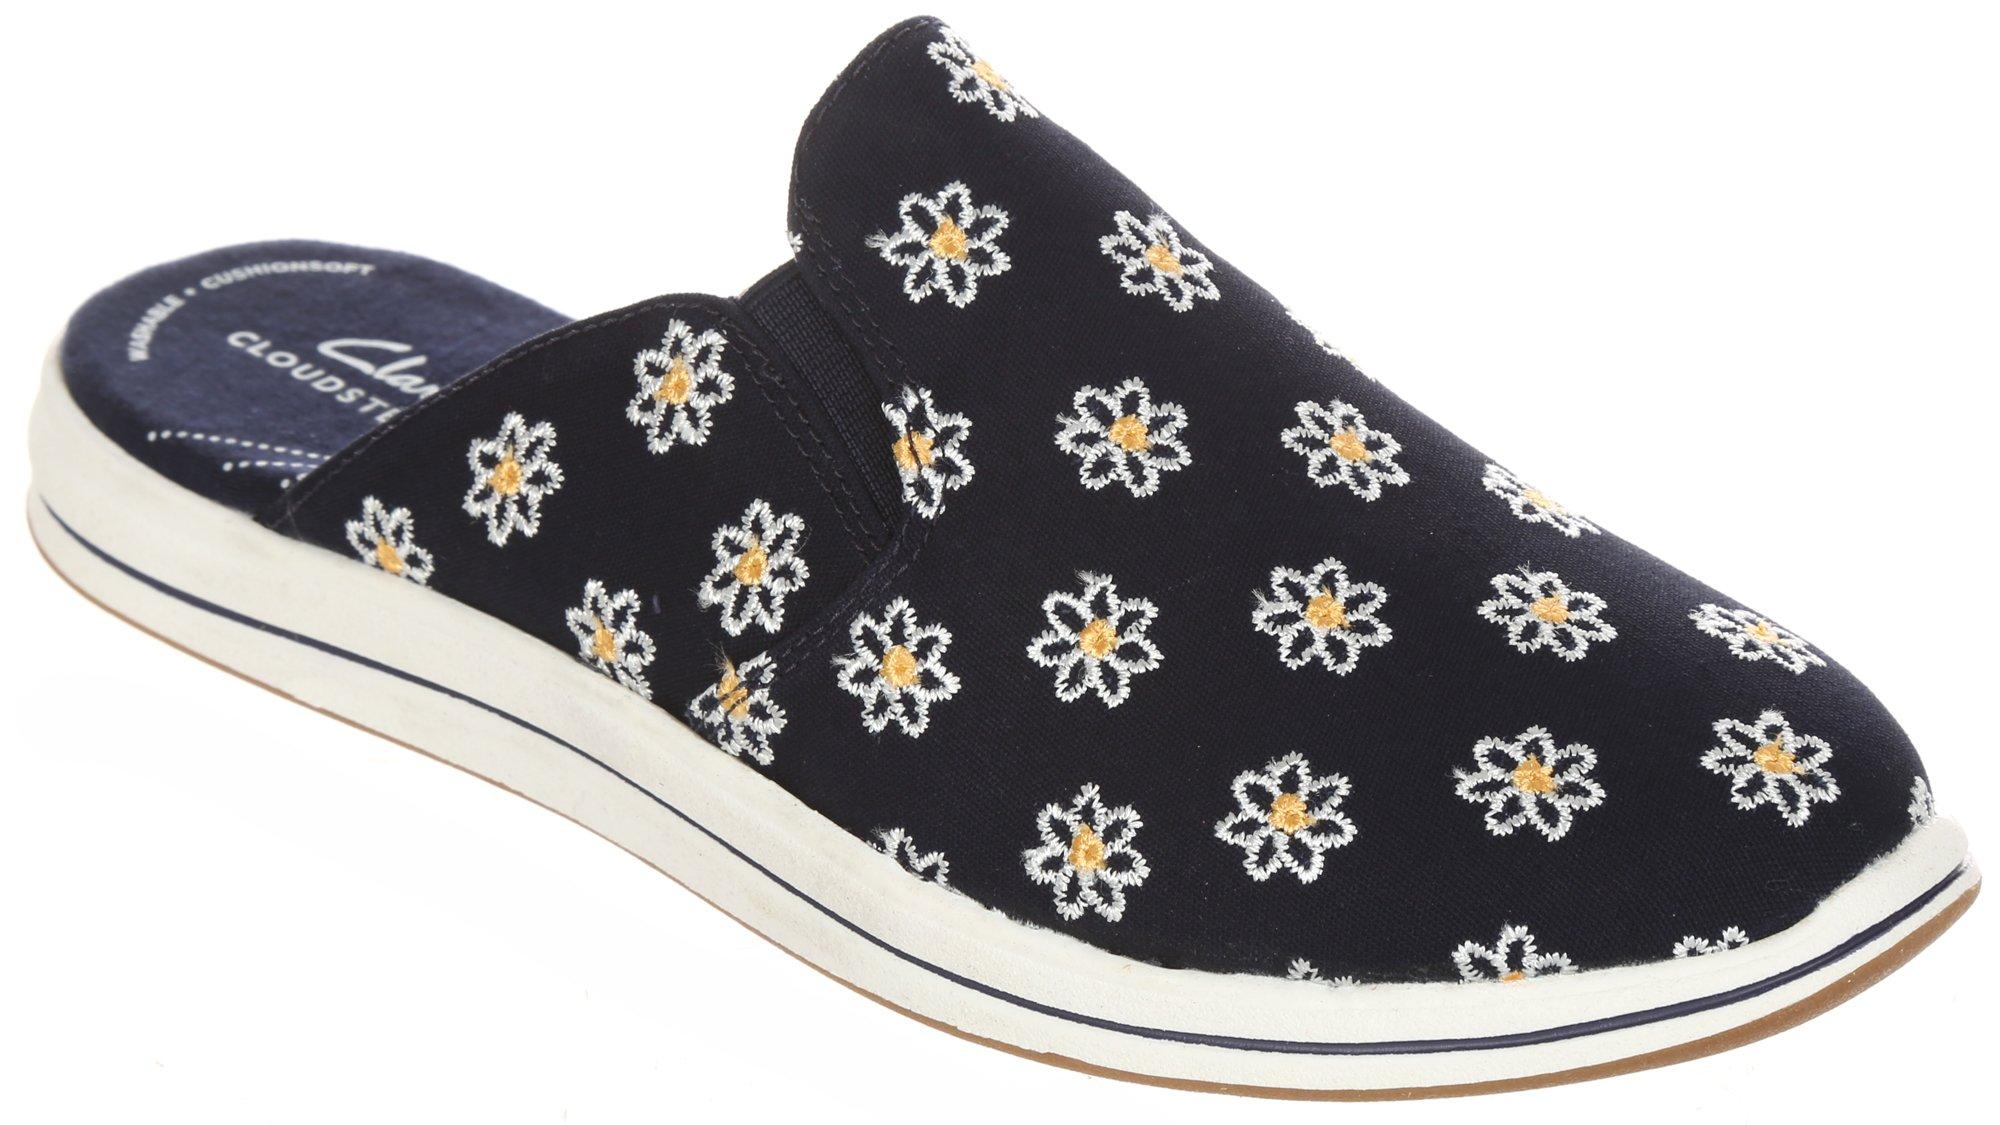 Women's Floral Embroidered Canvas Slip Ons